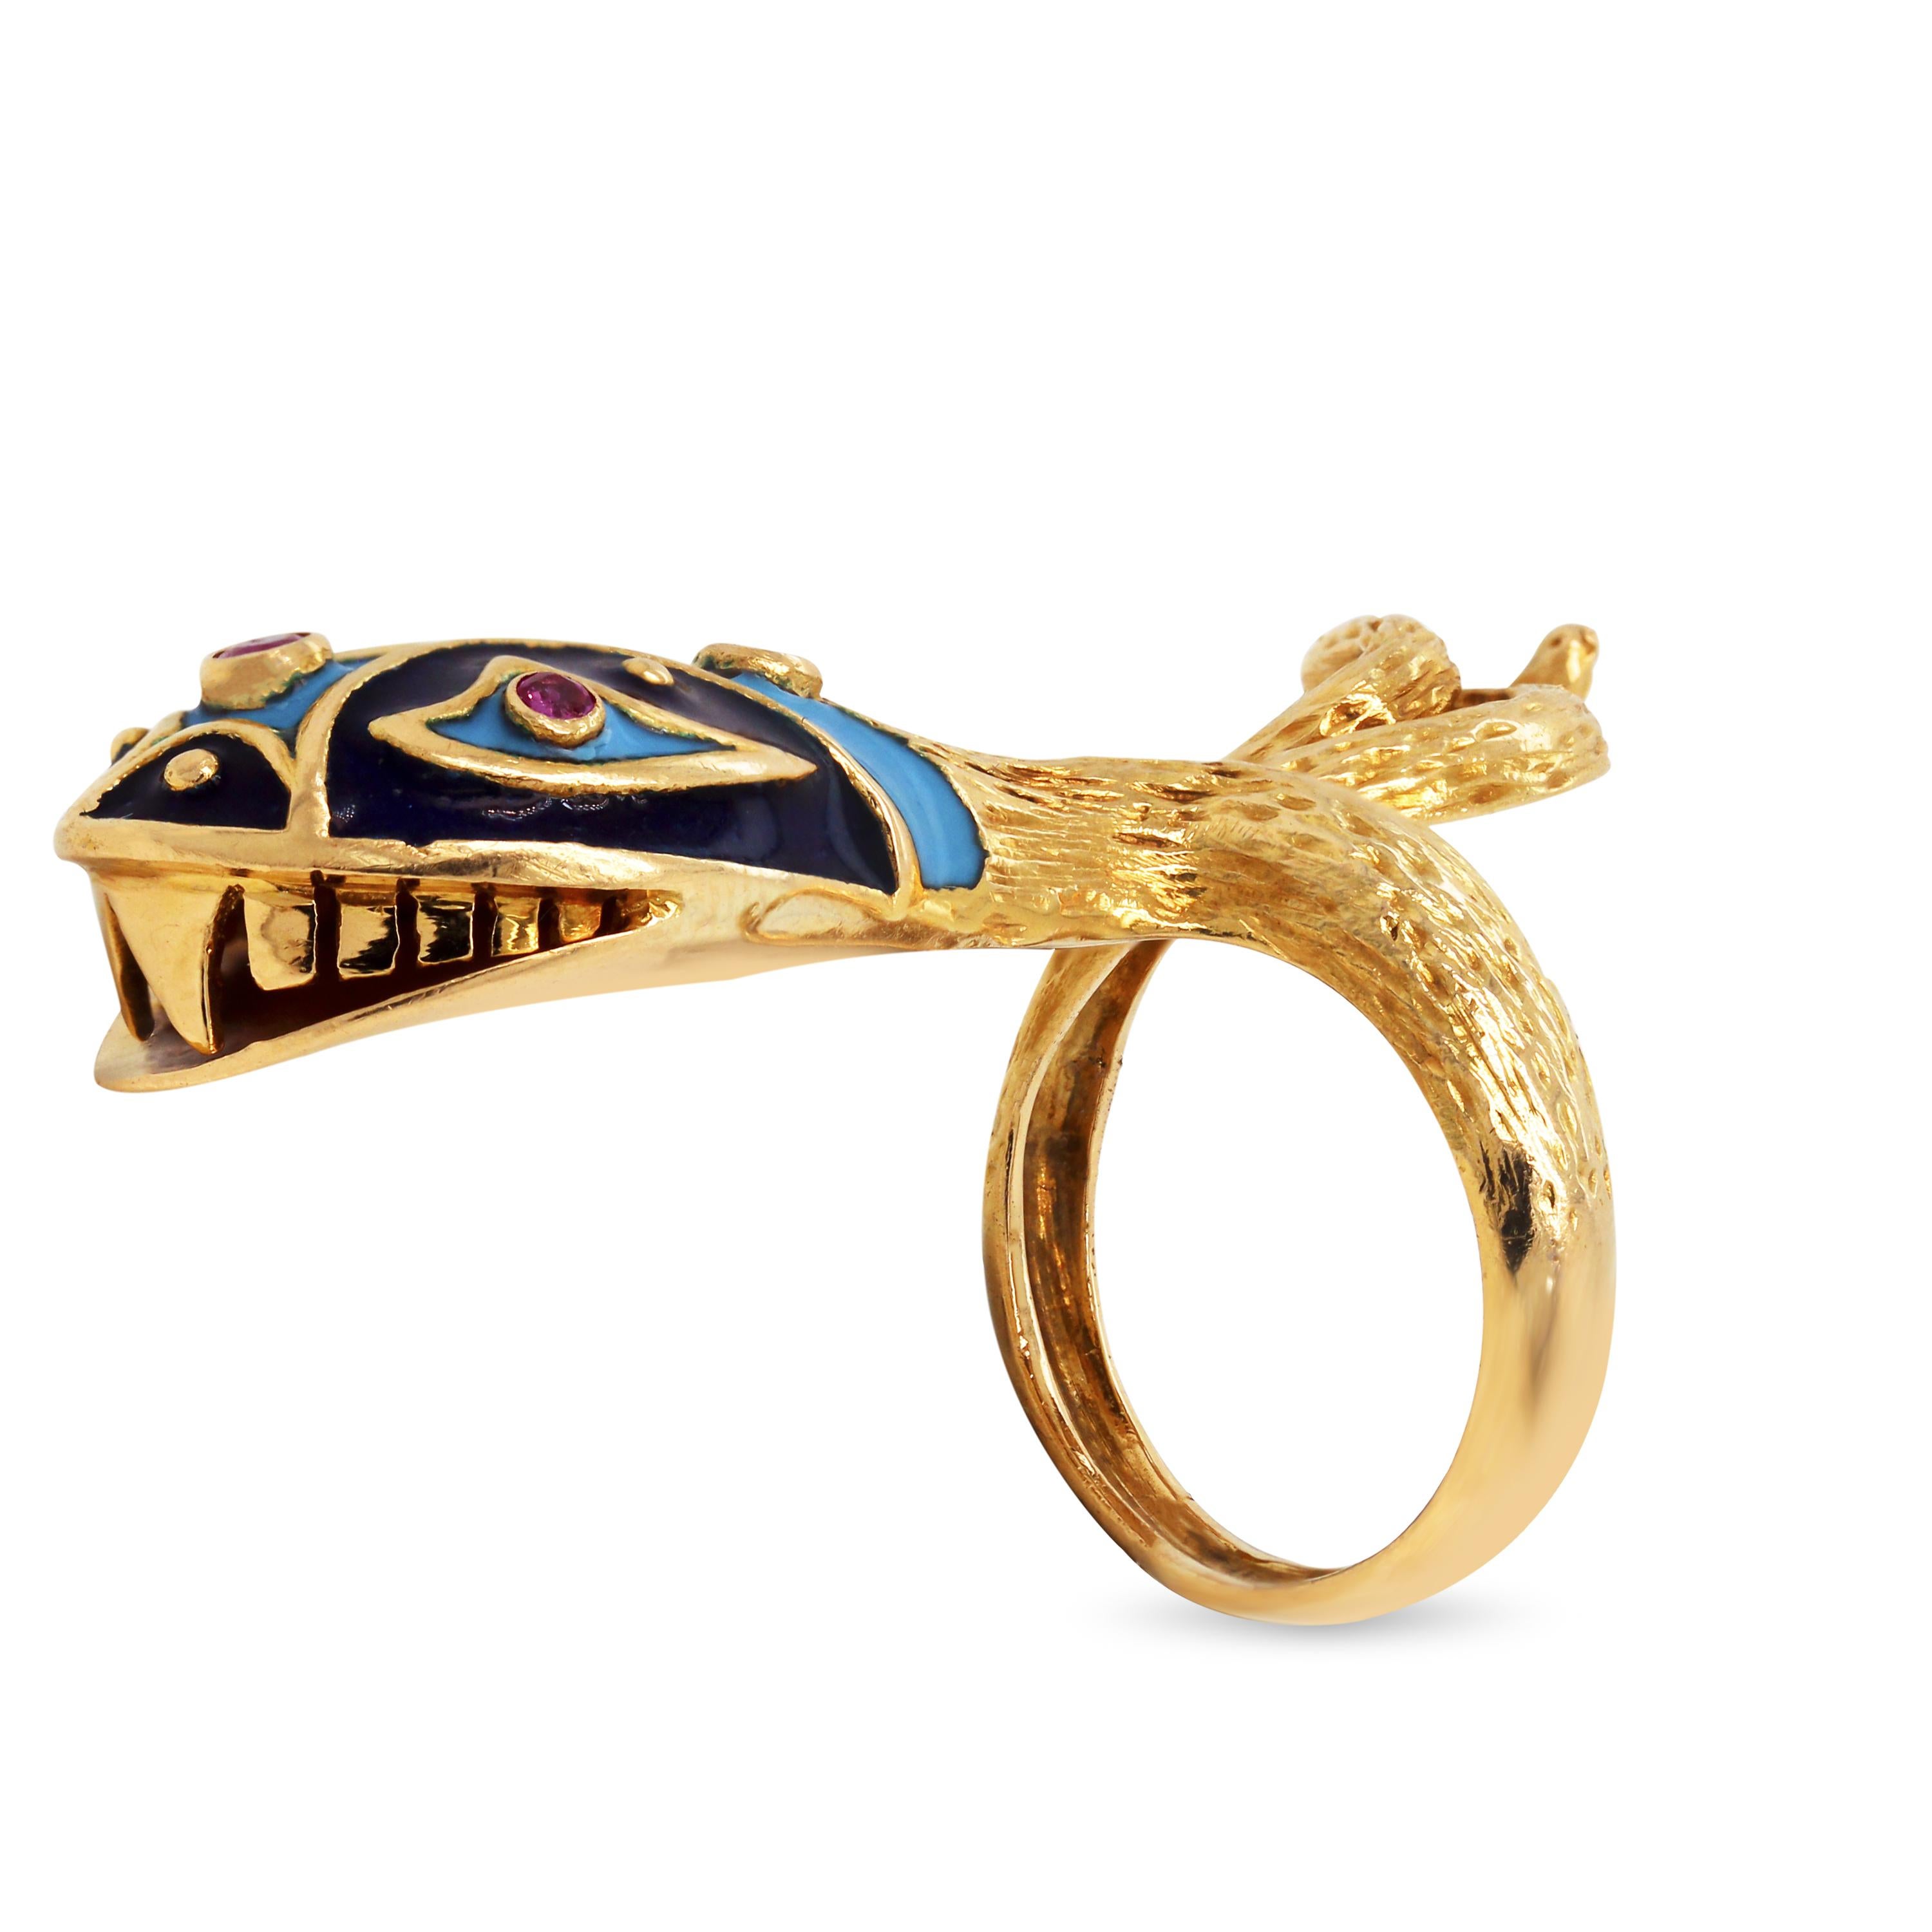 18K Yellow Gold Blue Enamel Ruby Twisted Snake Serpentine Ring

This unique ring features a snake head with a twisted tail crafted entirely in solid 18k gold. The head of the snake has navy blue and baby blue enamel with rubys. 

Apprx. 0.08 carat